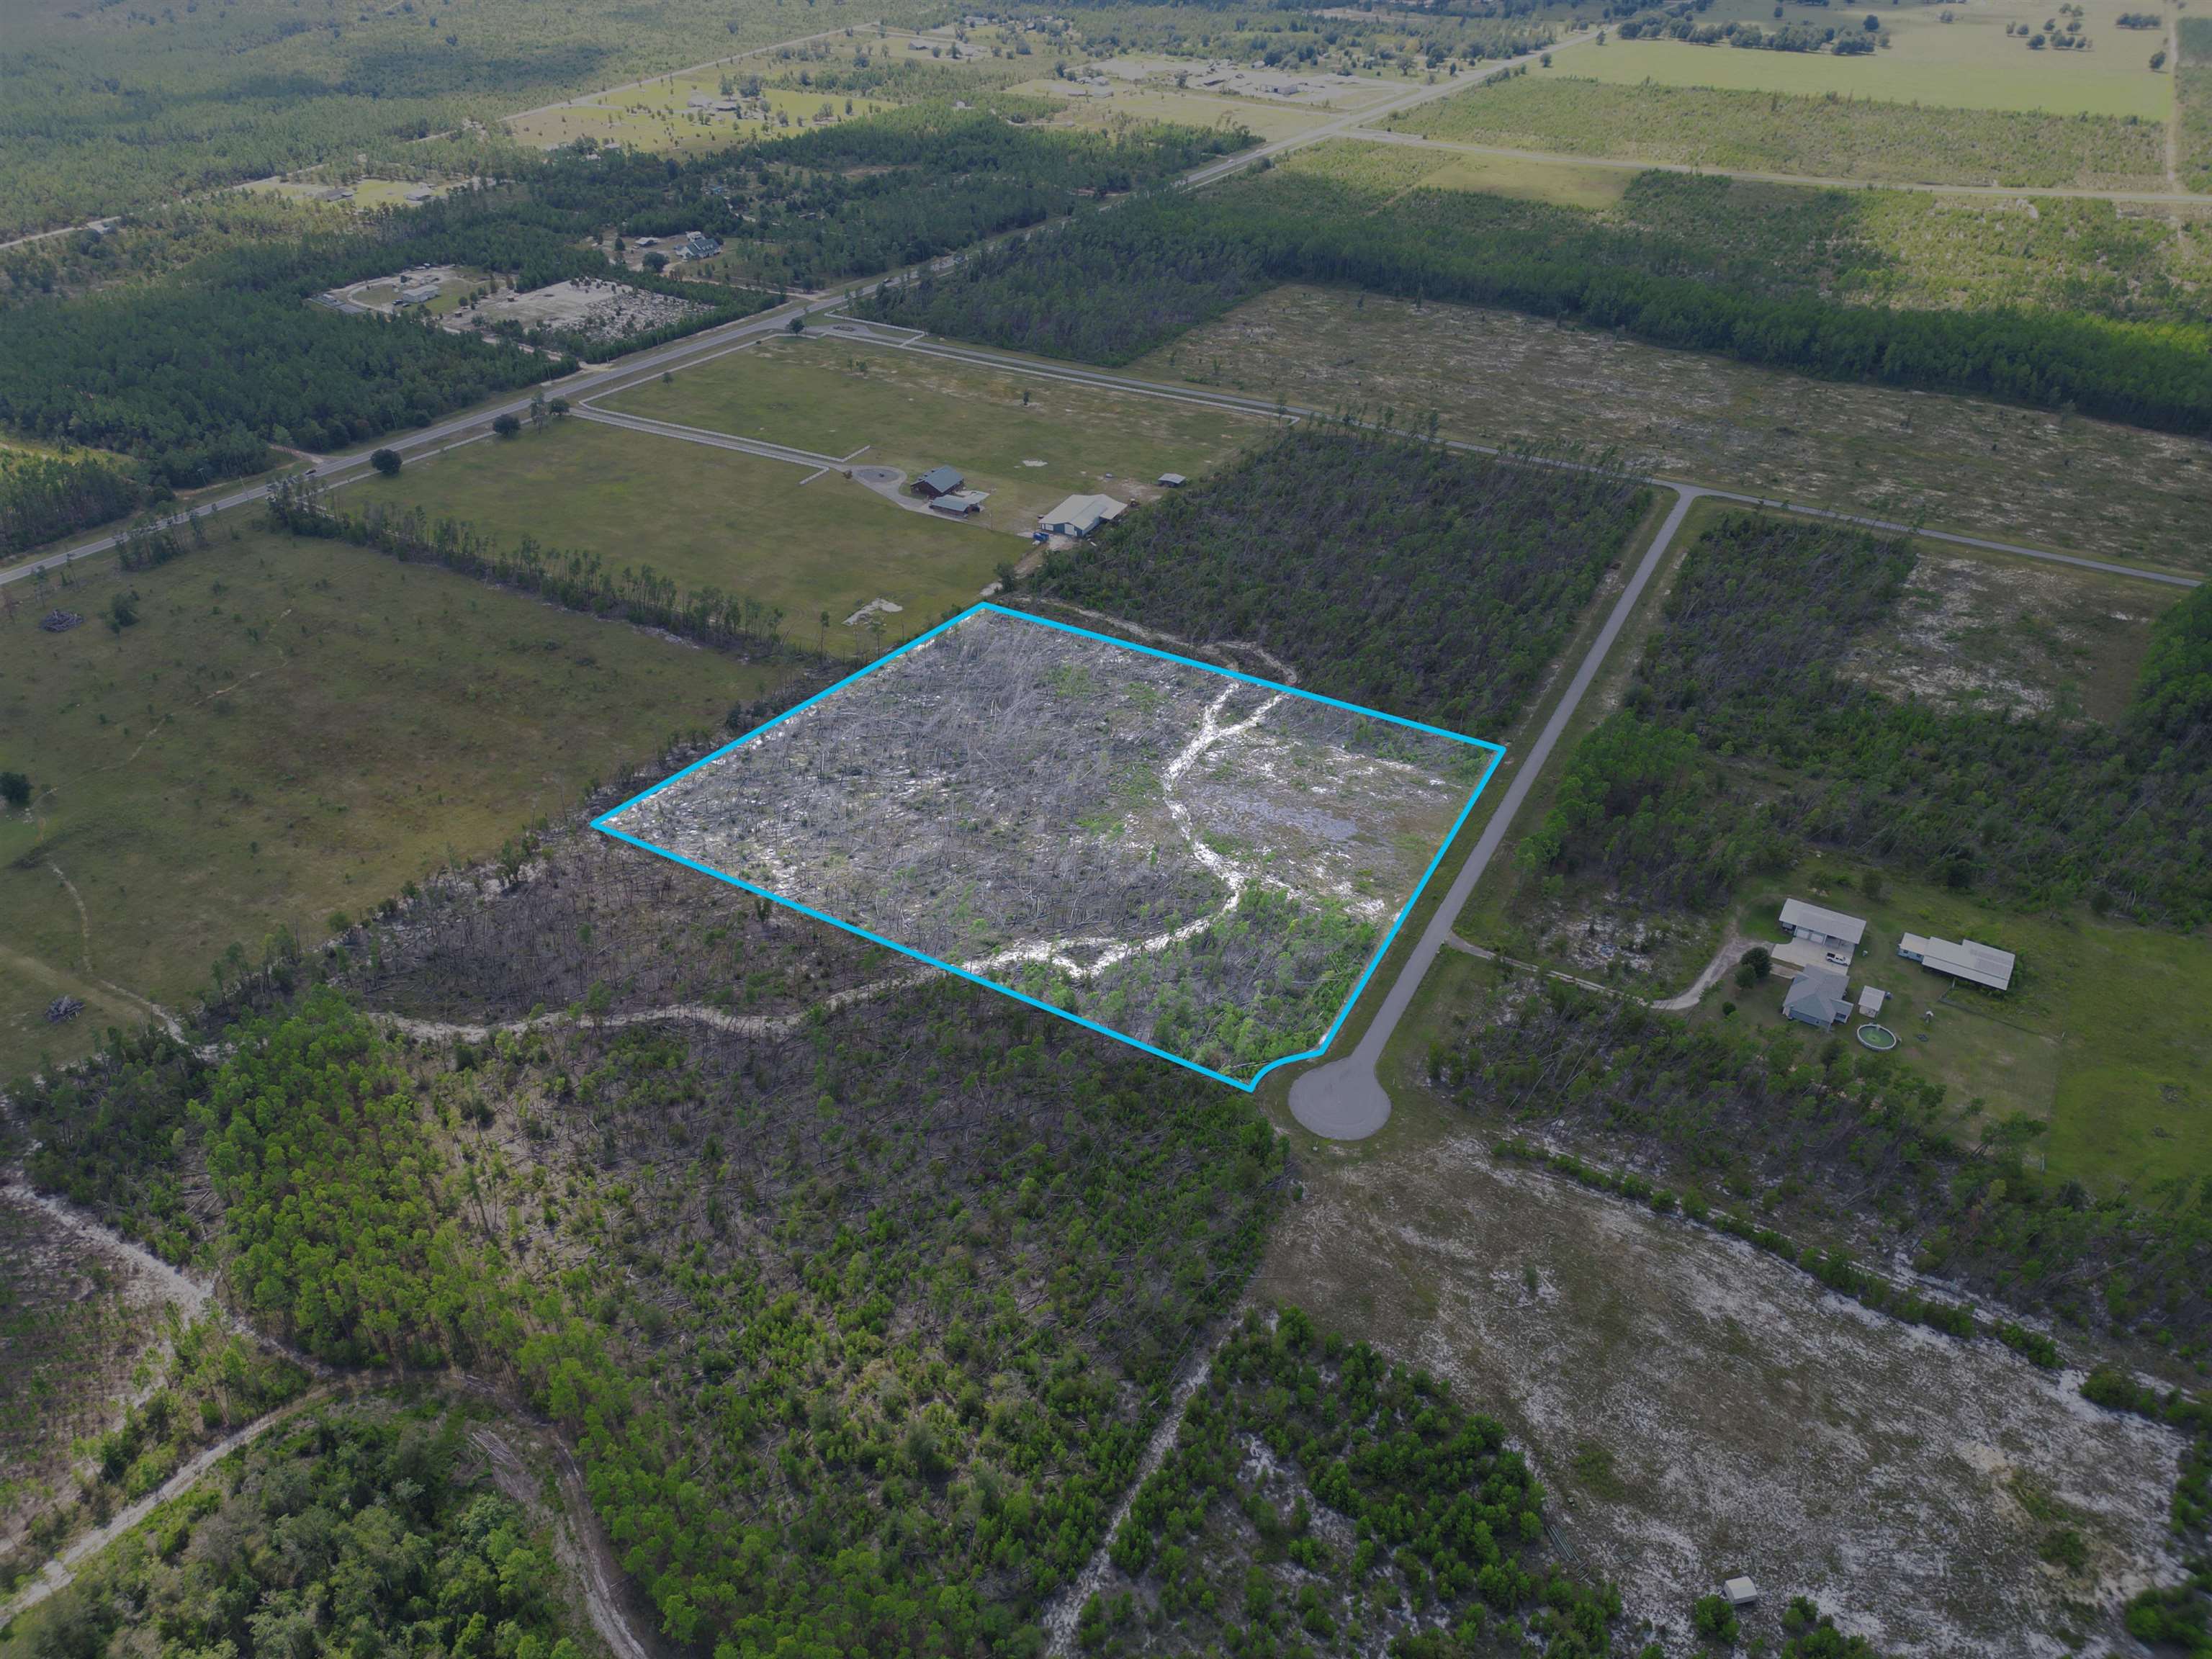 10.44 acres for sale in The Ranches at Telogia Creek, Bristol FL. Build your dream home in this gated community. Beautiful, peaceful, and serene. Perfect for those seeking tranquility.